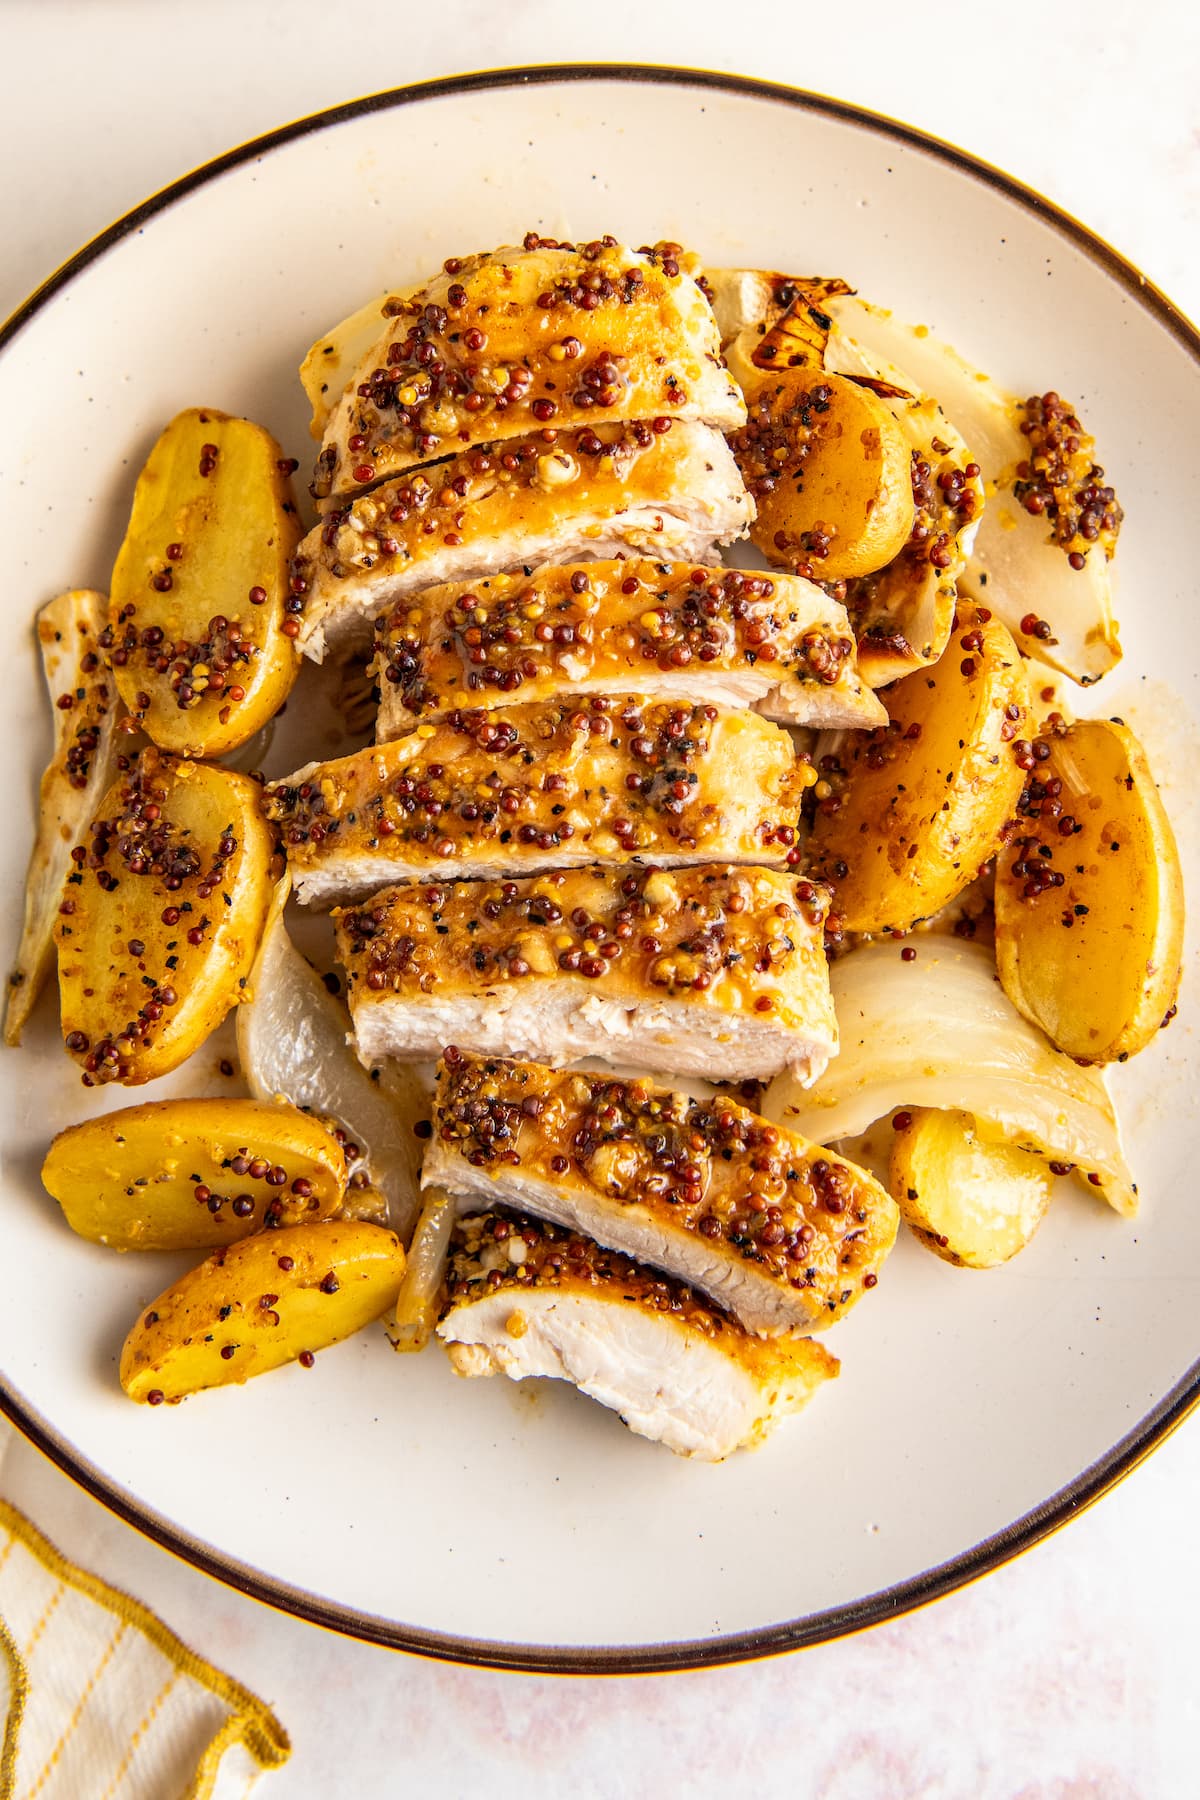 Slices of honey mustard chicken on a plate with potatoes and onions.